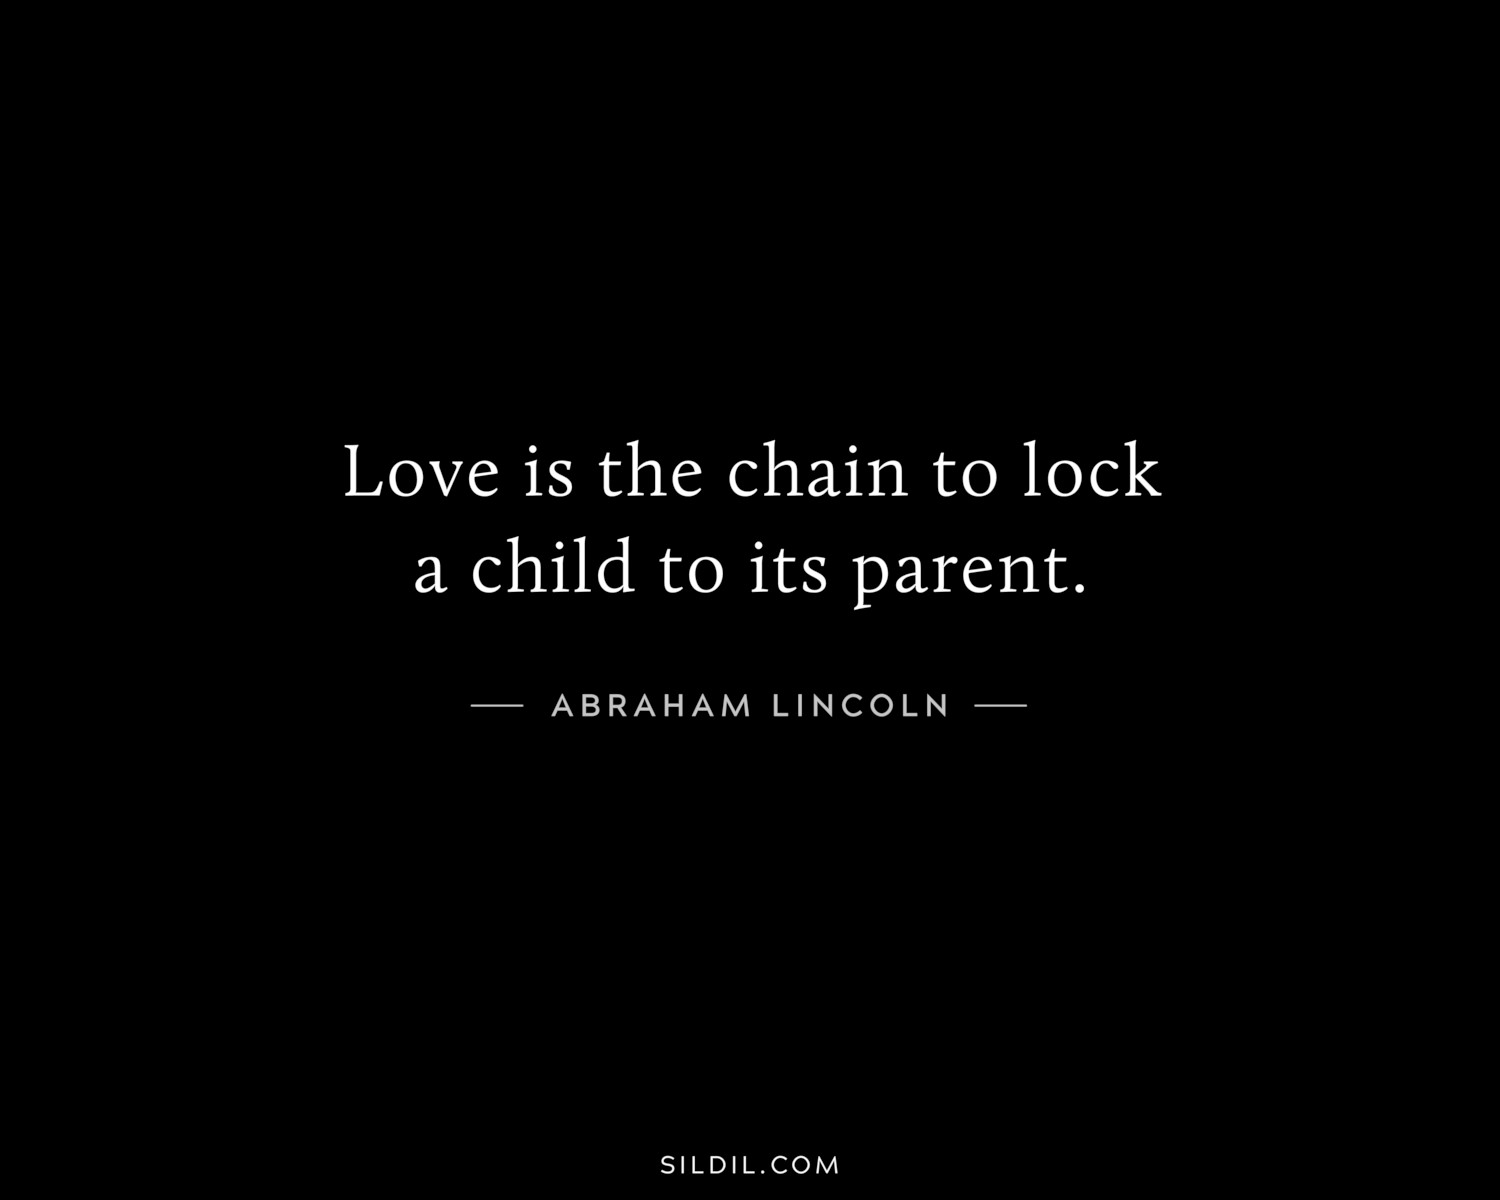 Love is the chain to lock a child to its parent.